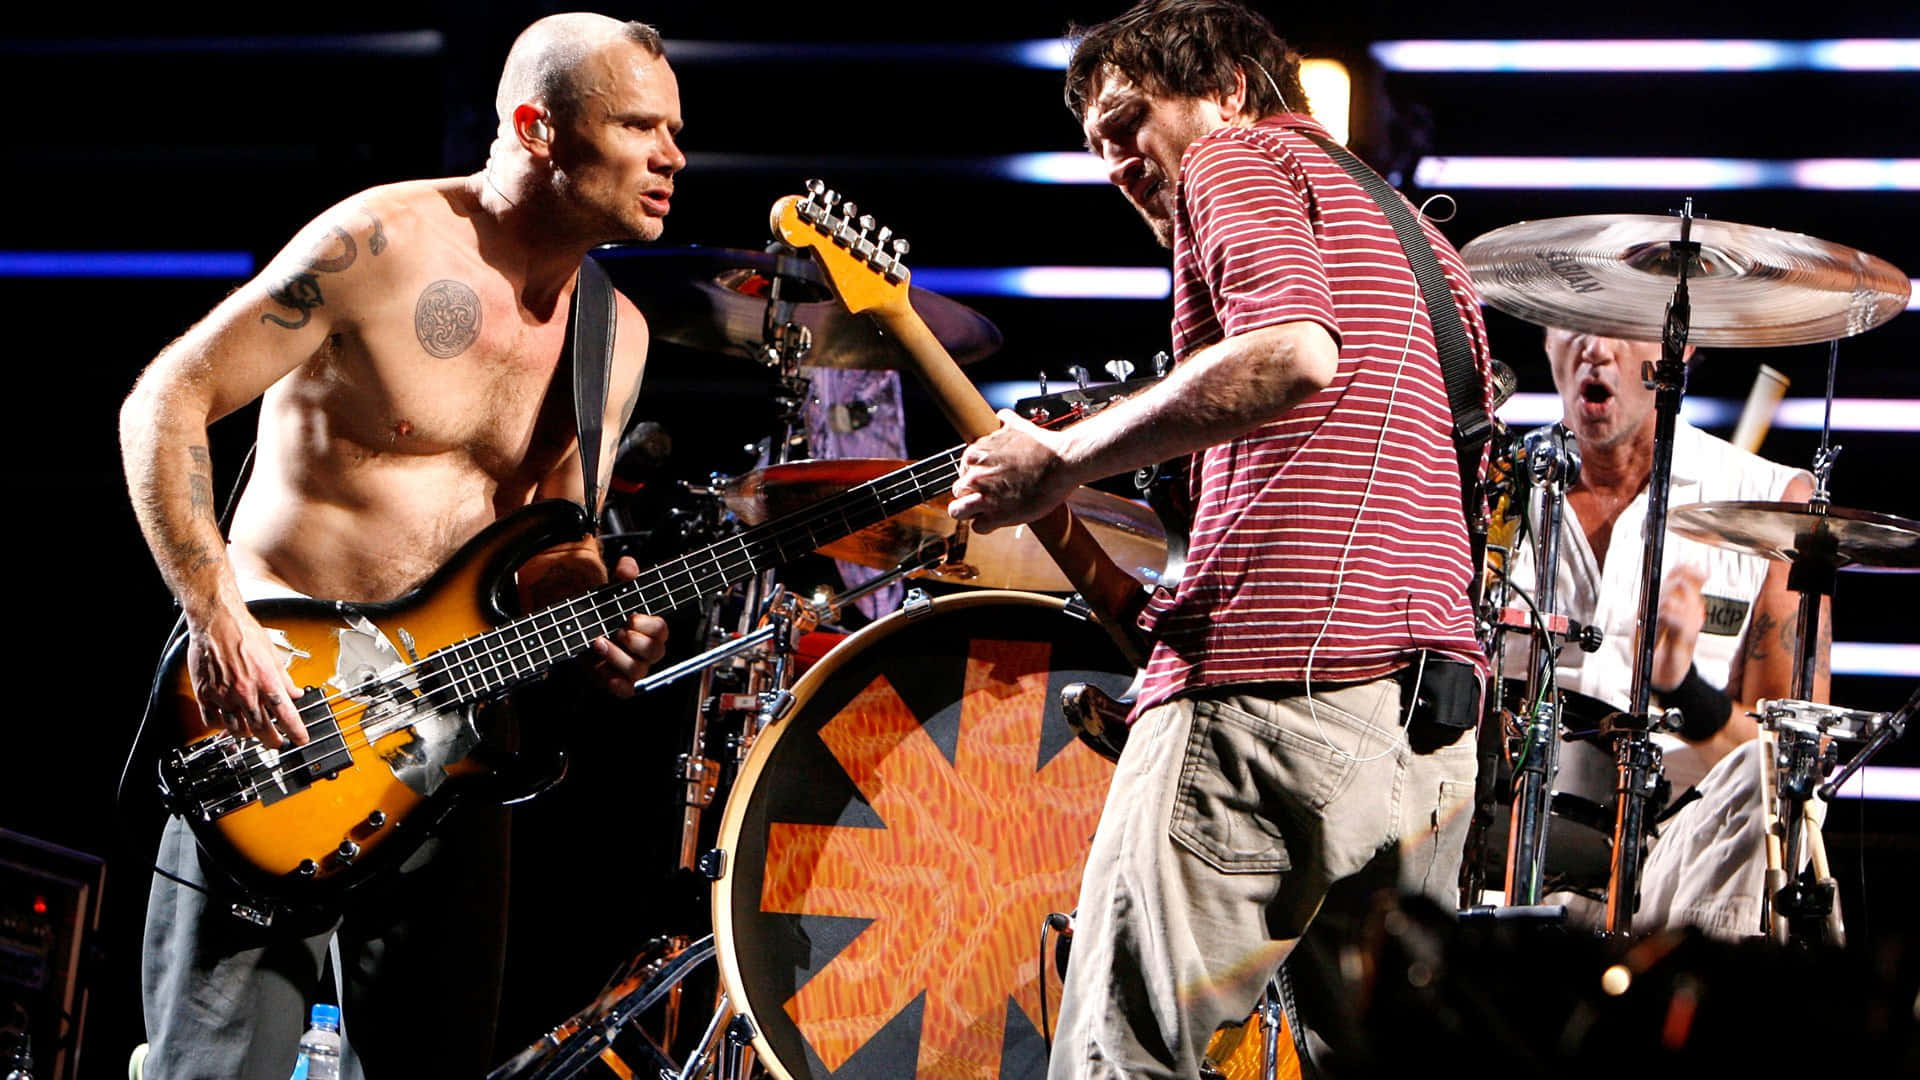 Red Hot Chili Peppers With Two Guitarists Wallpaper